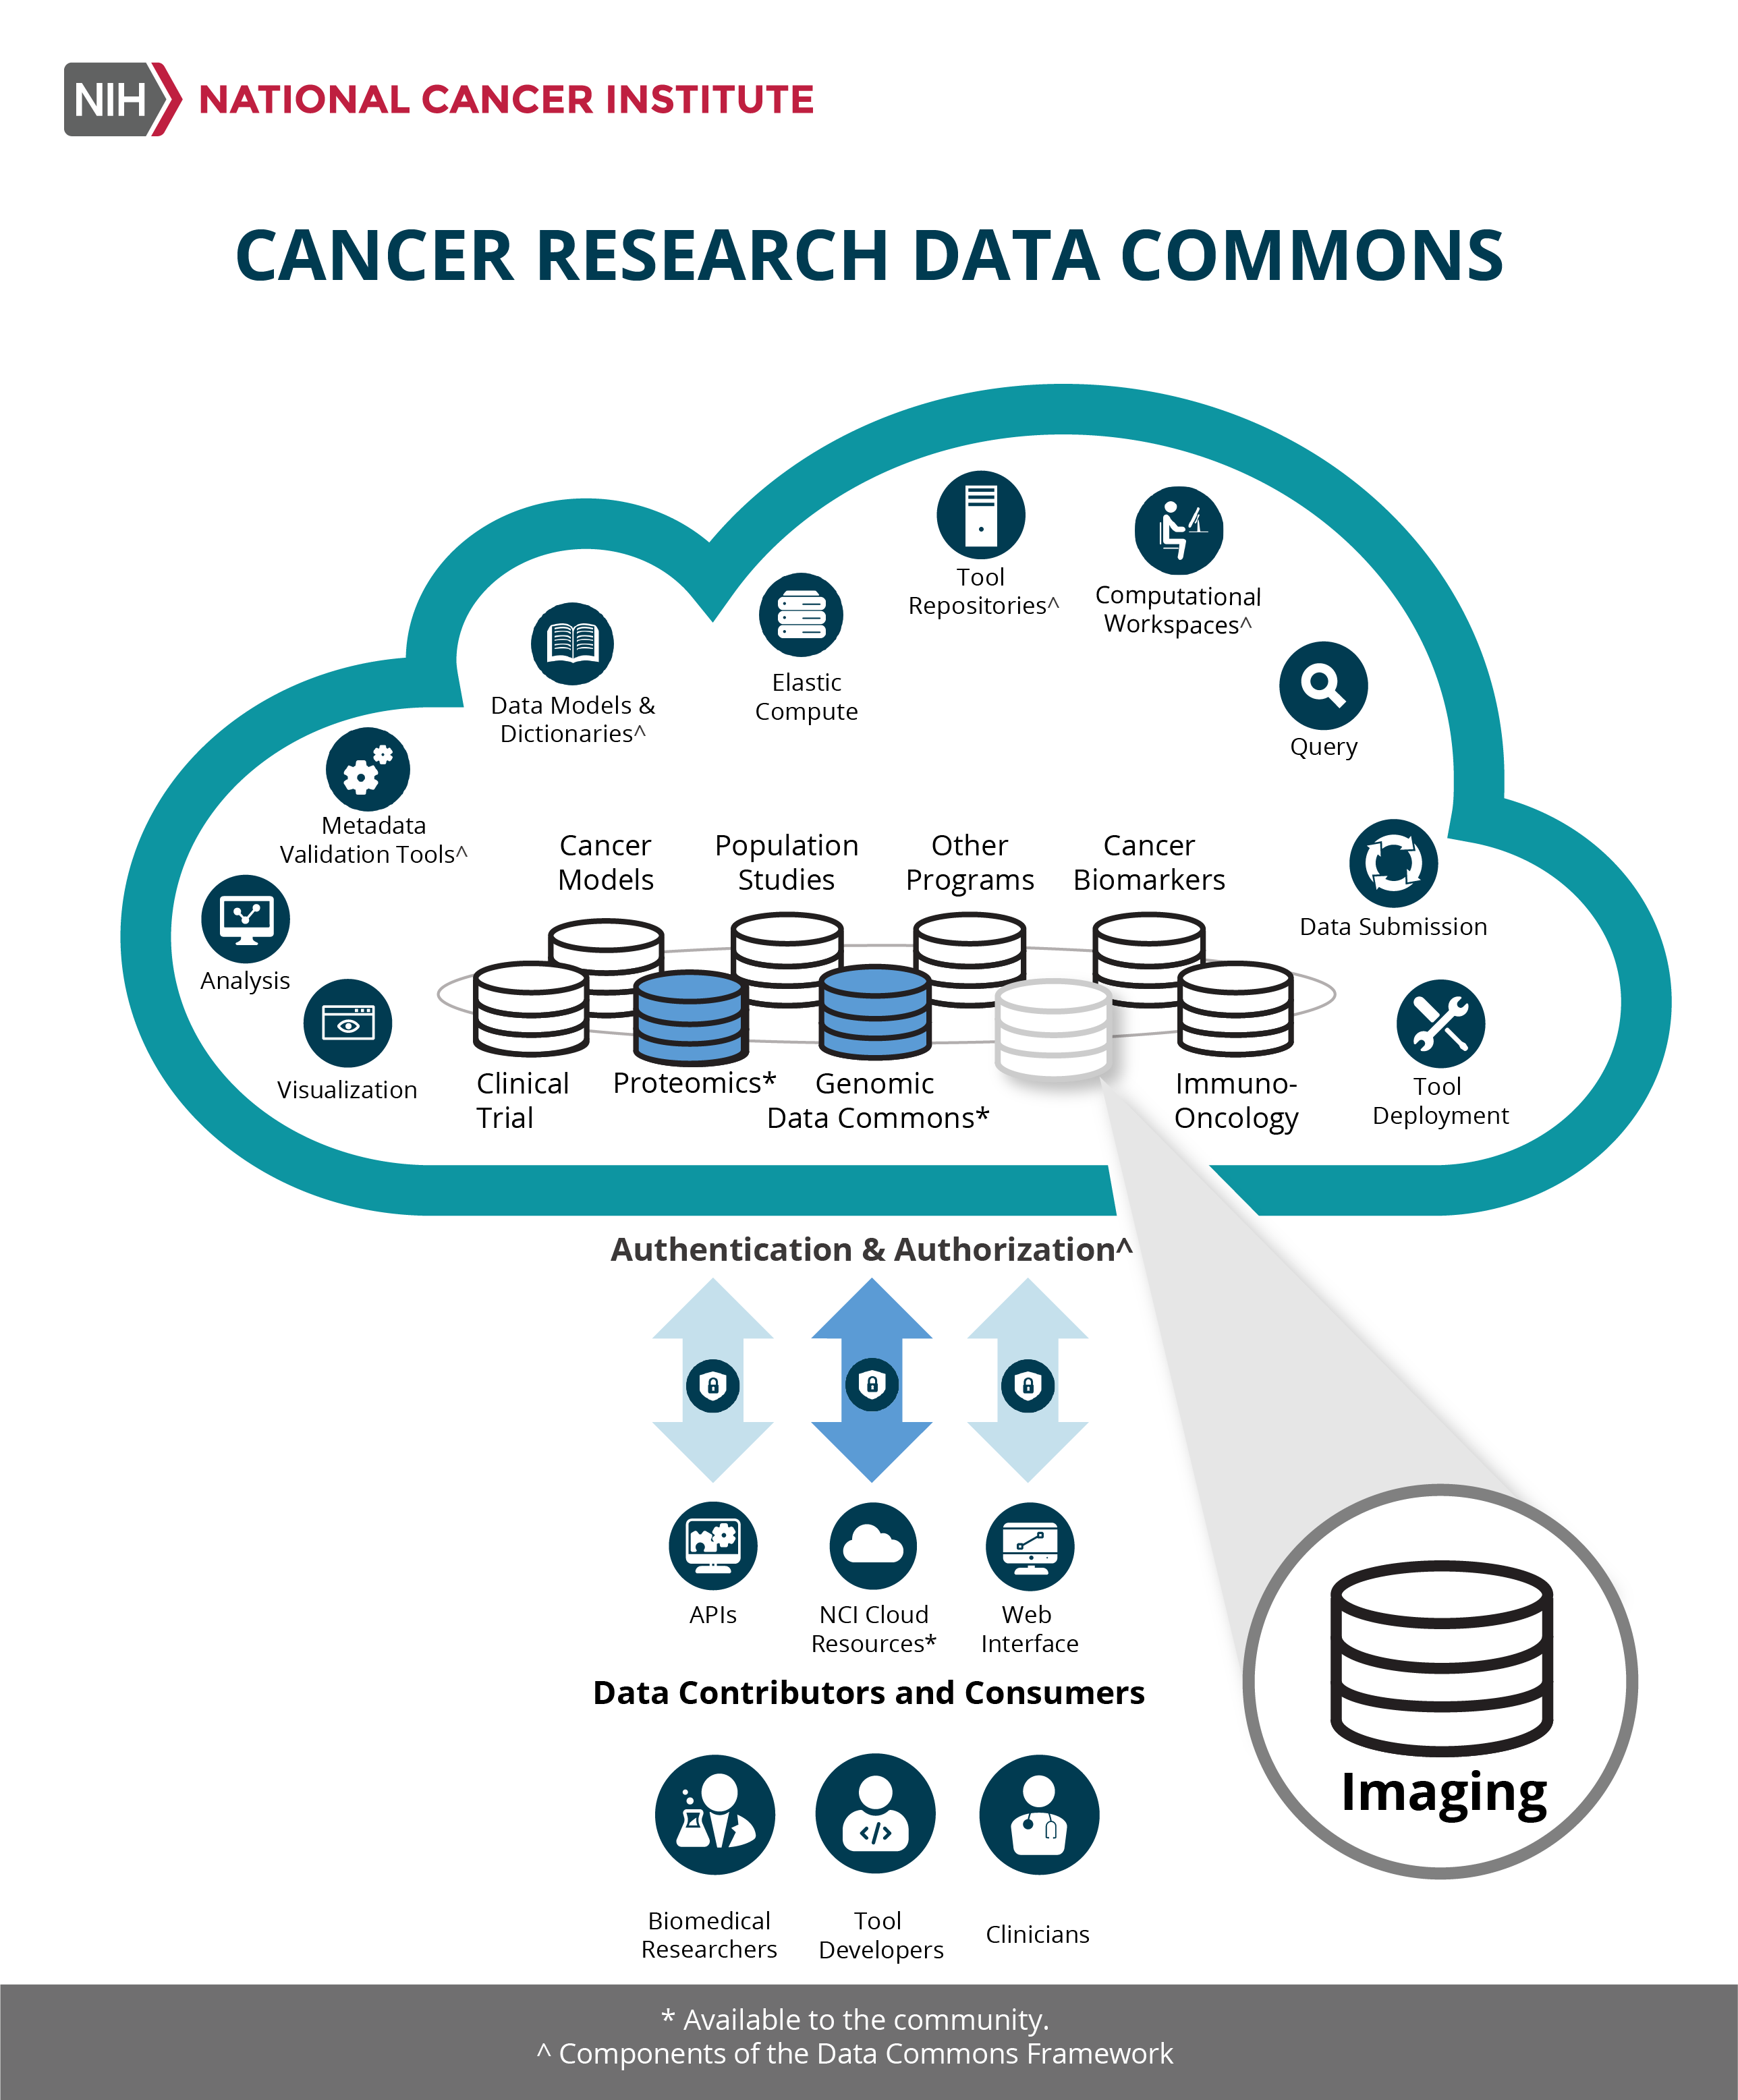 The NCI Cancer Research Data Commons (CRDC) provides biomedical researchers, tool developers, and data scientists with access to data from NCI programs through the Genomic Data Commons, NCI Cloud Resources, and Proteomics Data Commons. The CRDC allows users to analyze, share, and store results, and is growing to include a wider range of data, including proteomics, imaging, and canine.